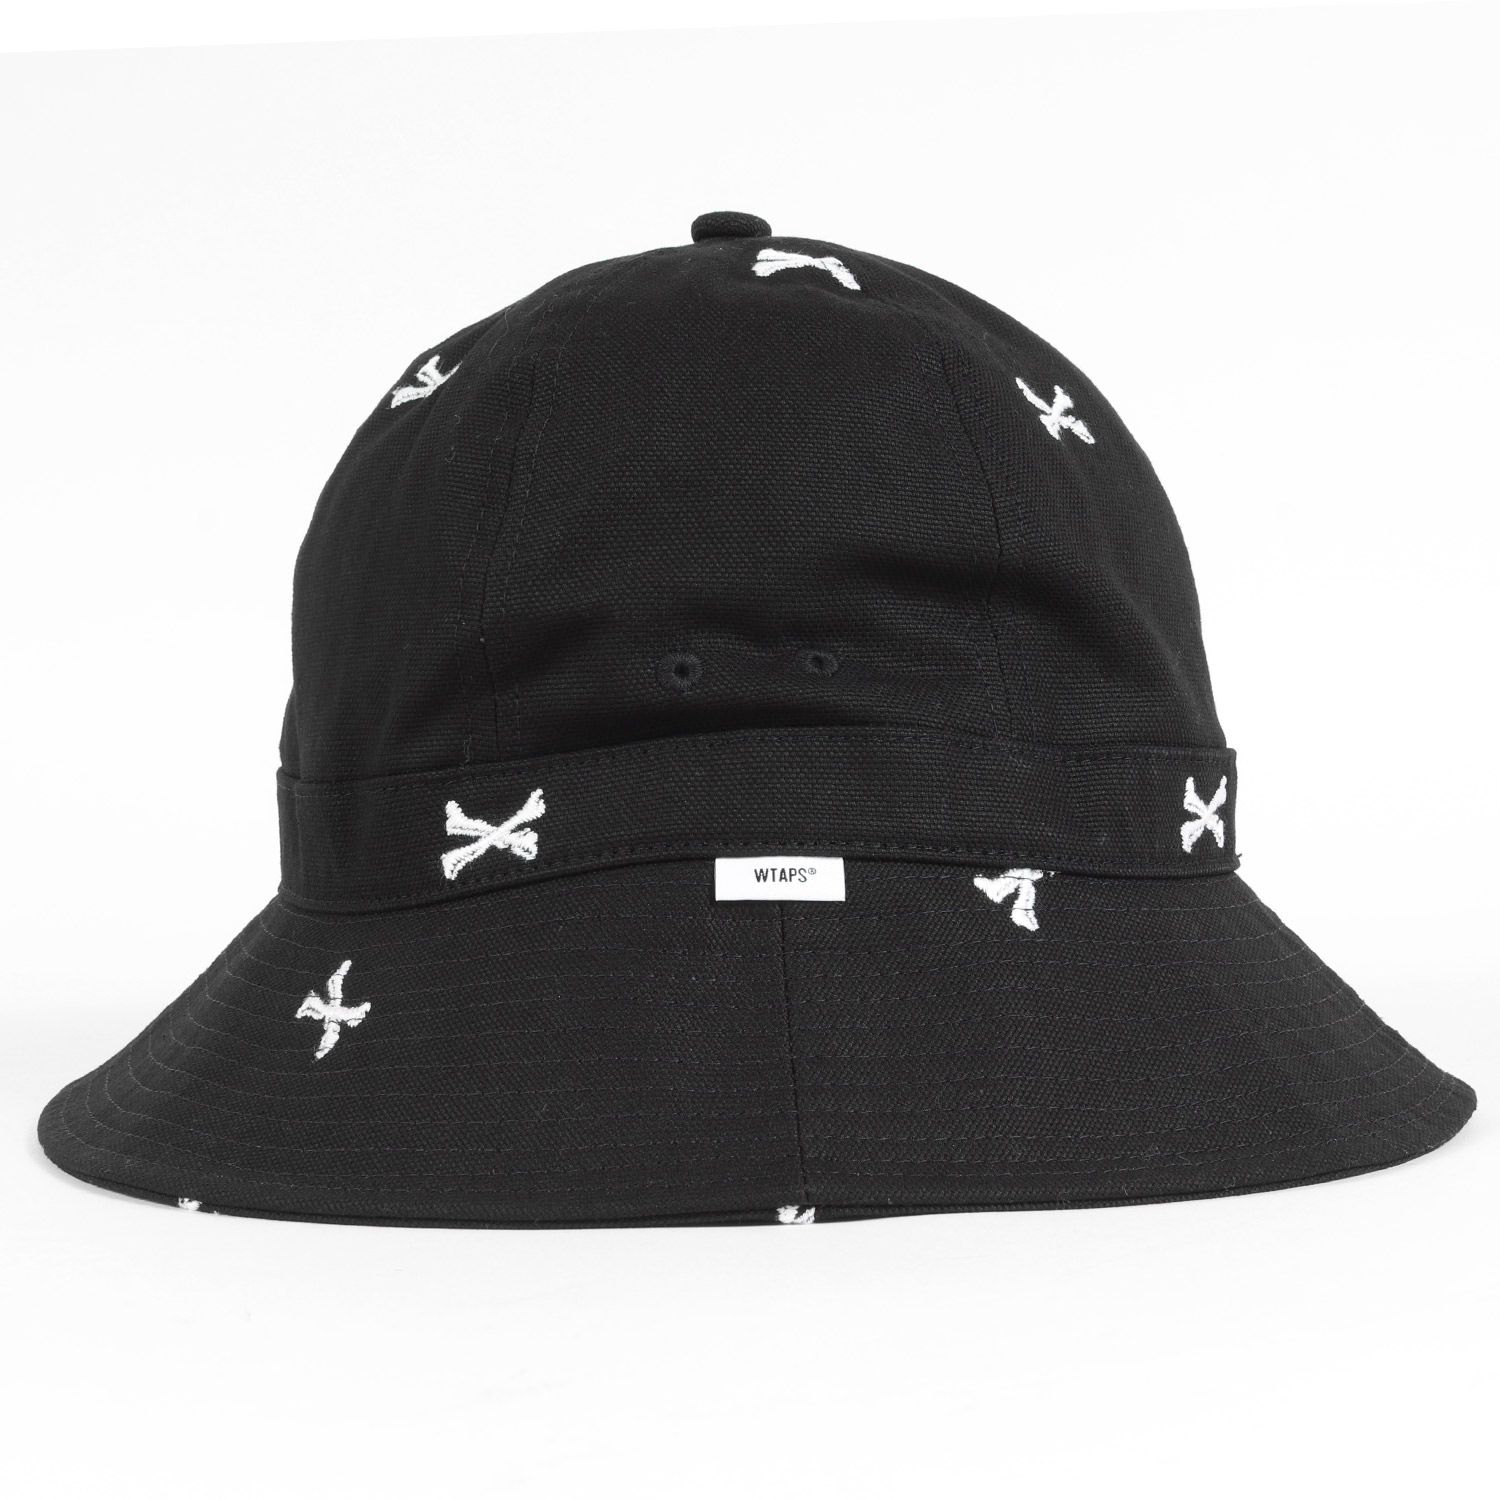 22SS WTAPS BALL 01 HAT クロスボーン ボールハット